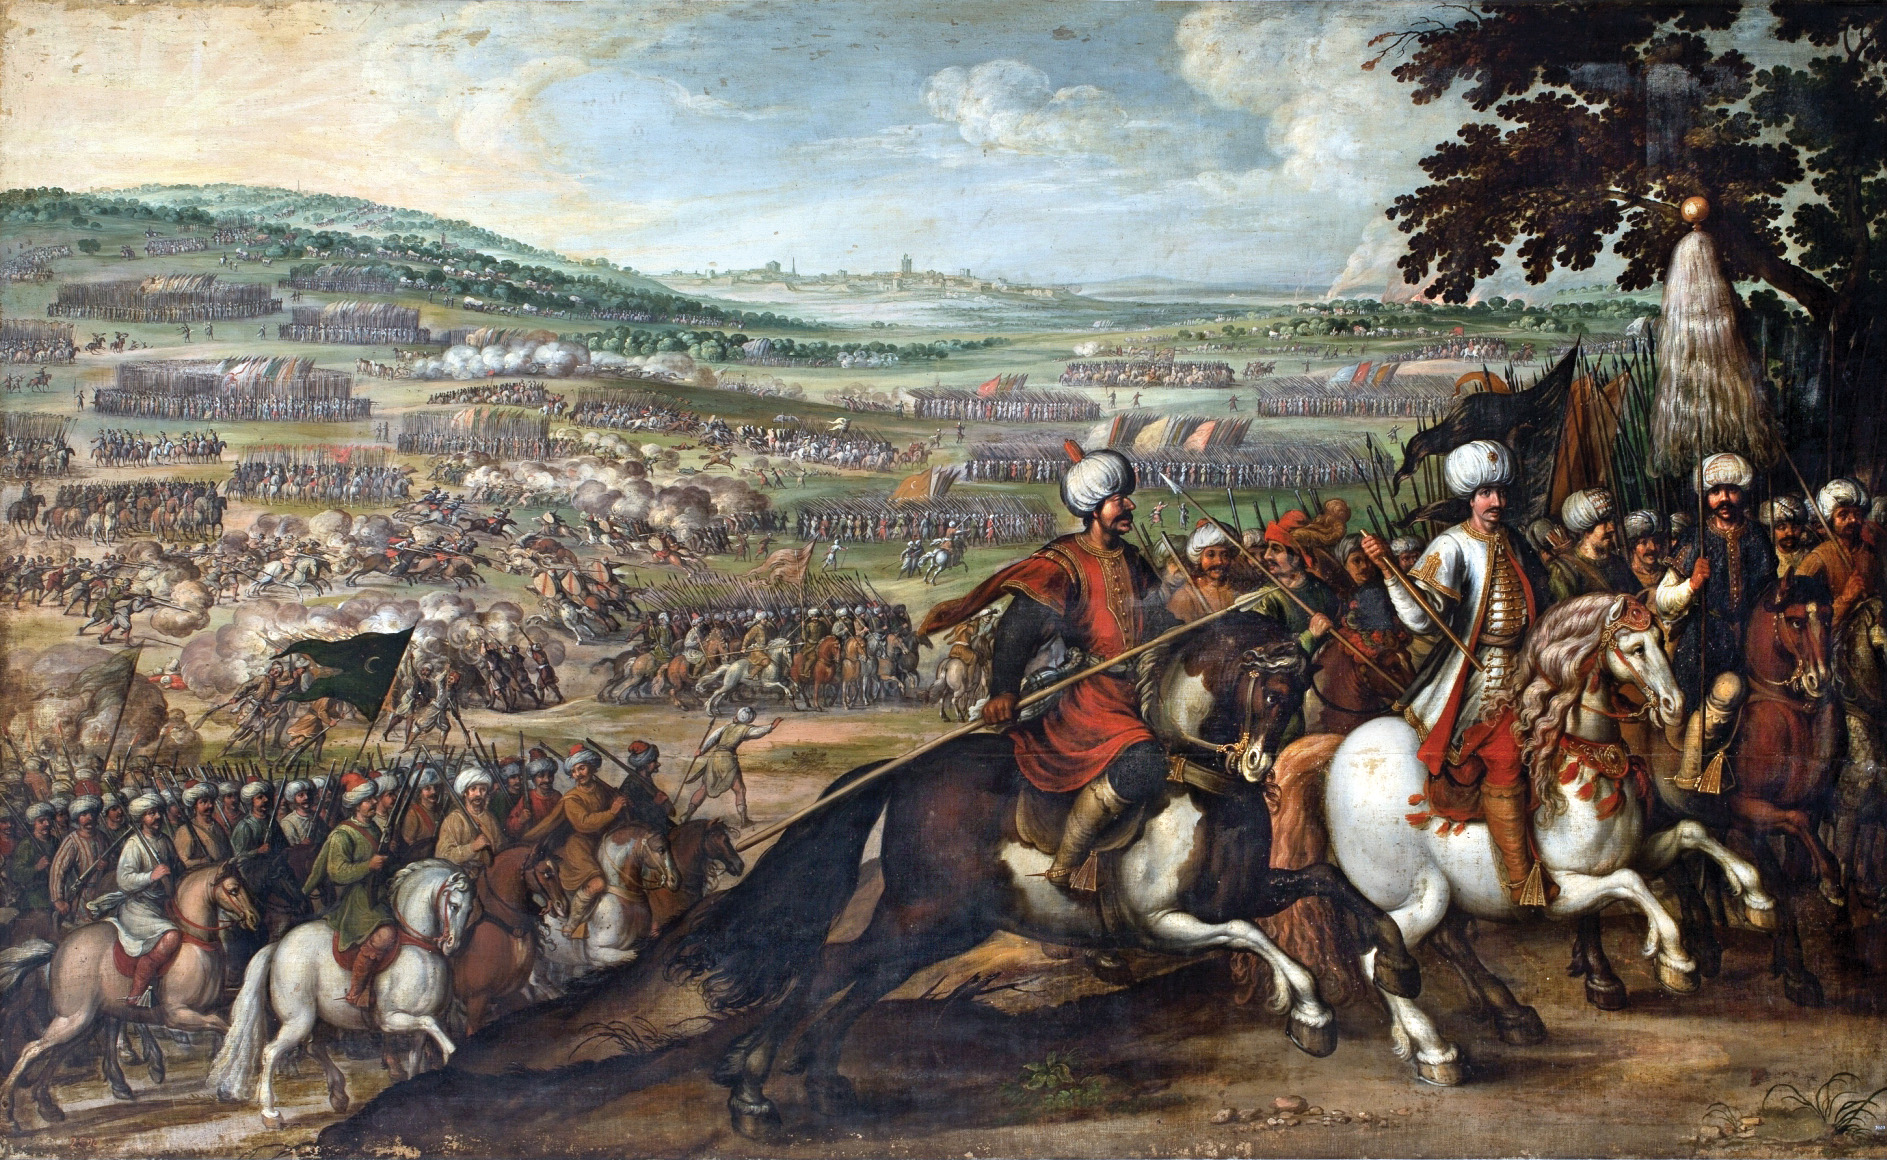 Suleiman lost 20,000 men in a failed bid to capture Vienna in 1529. In the face of a determined defense by the Hapsburg forces, he withdrew before the onset of winter. 